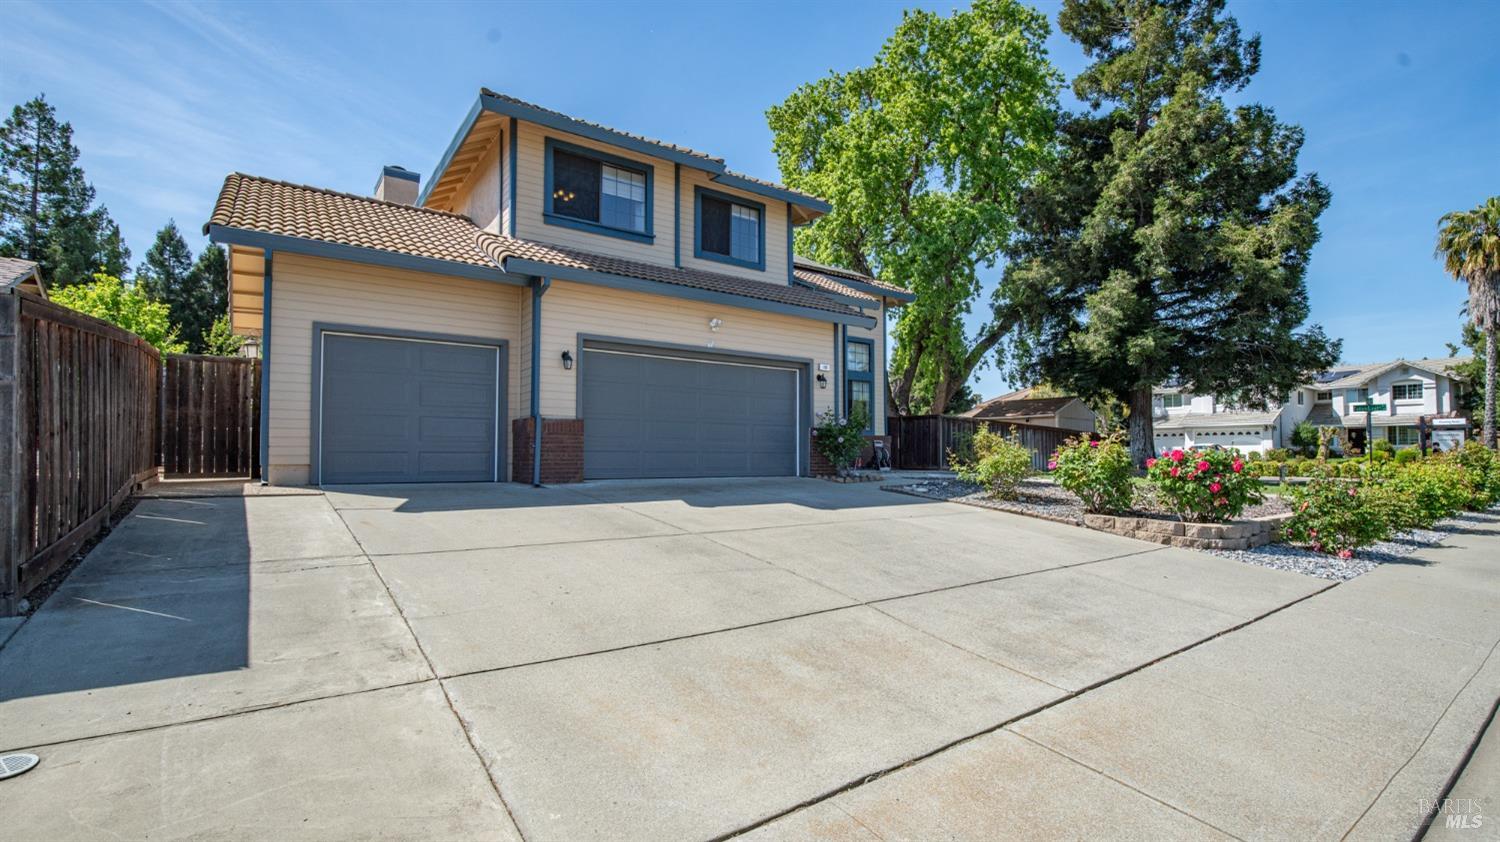 Welcome to your charming two-story Vacaville retreat nestled in a sought-after neighborhood! Boastin